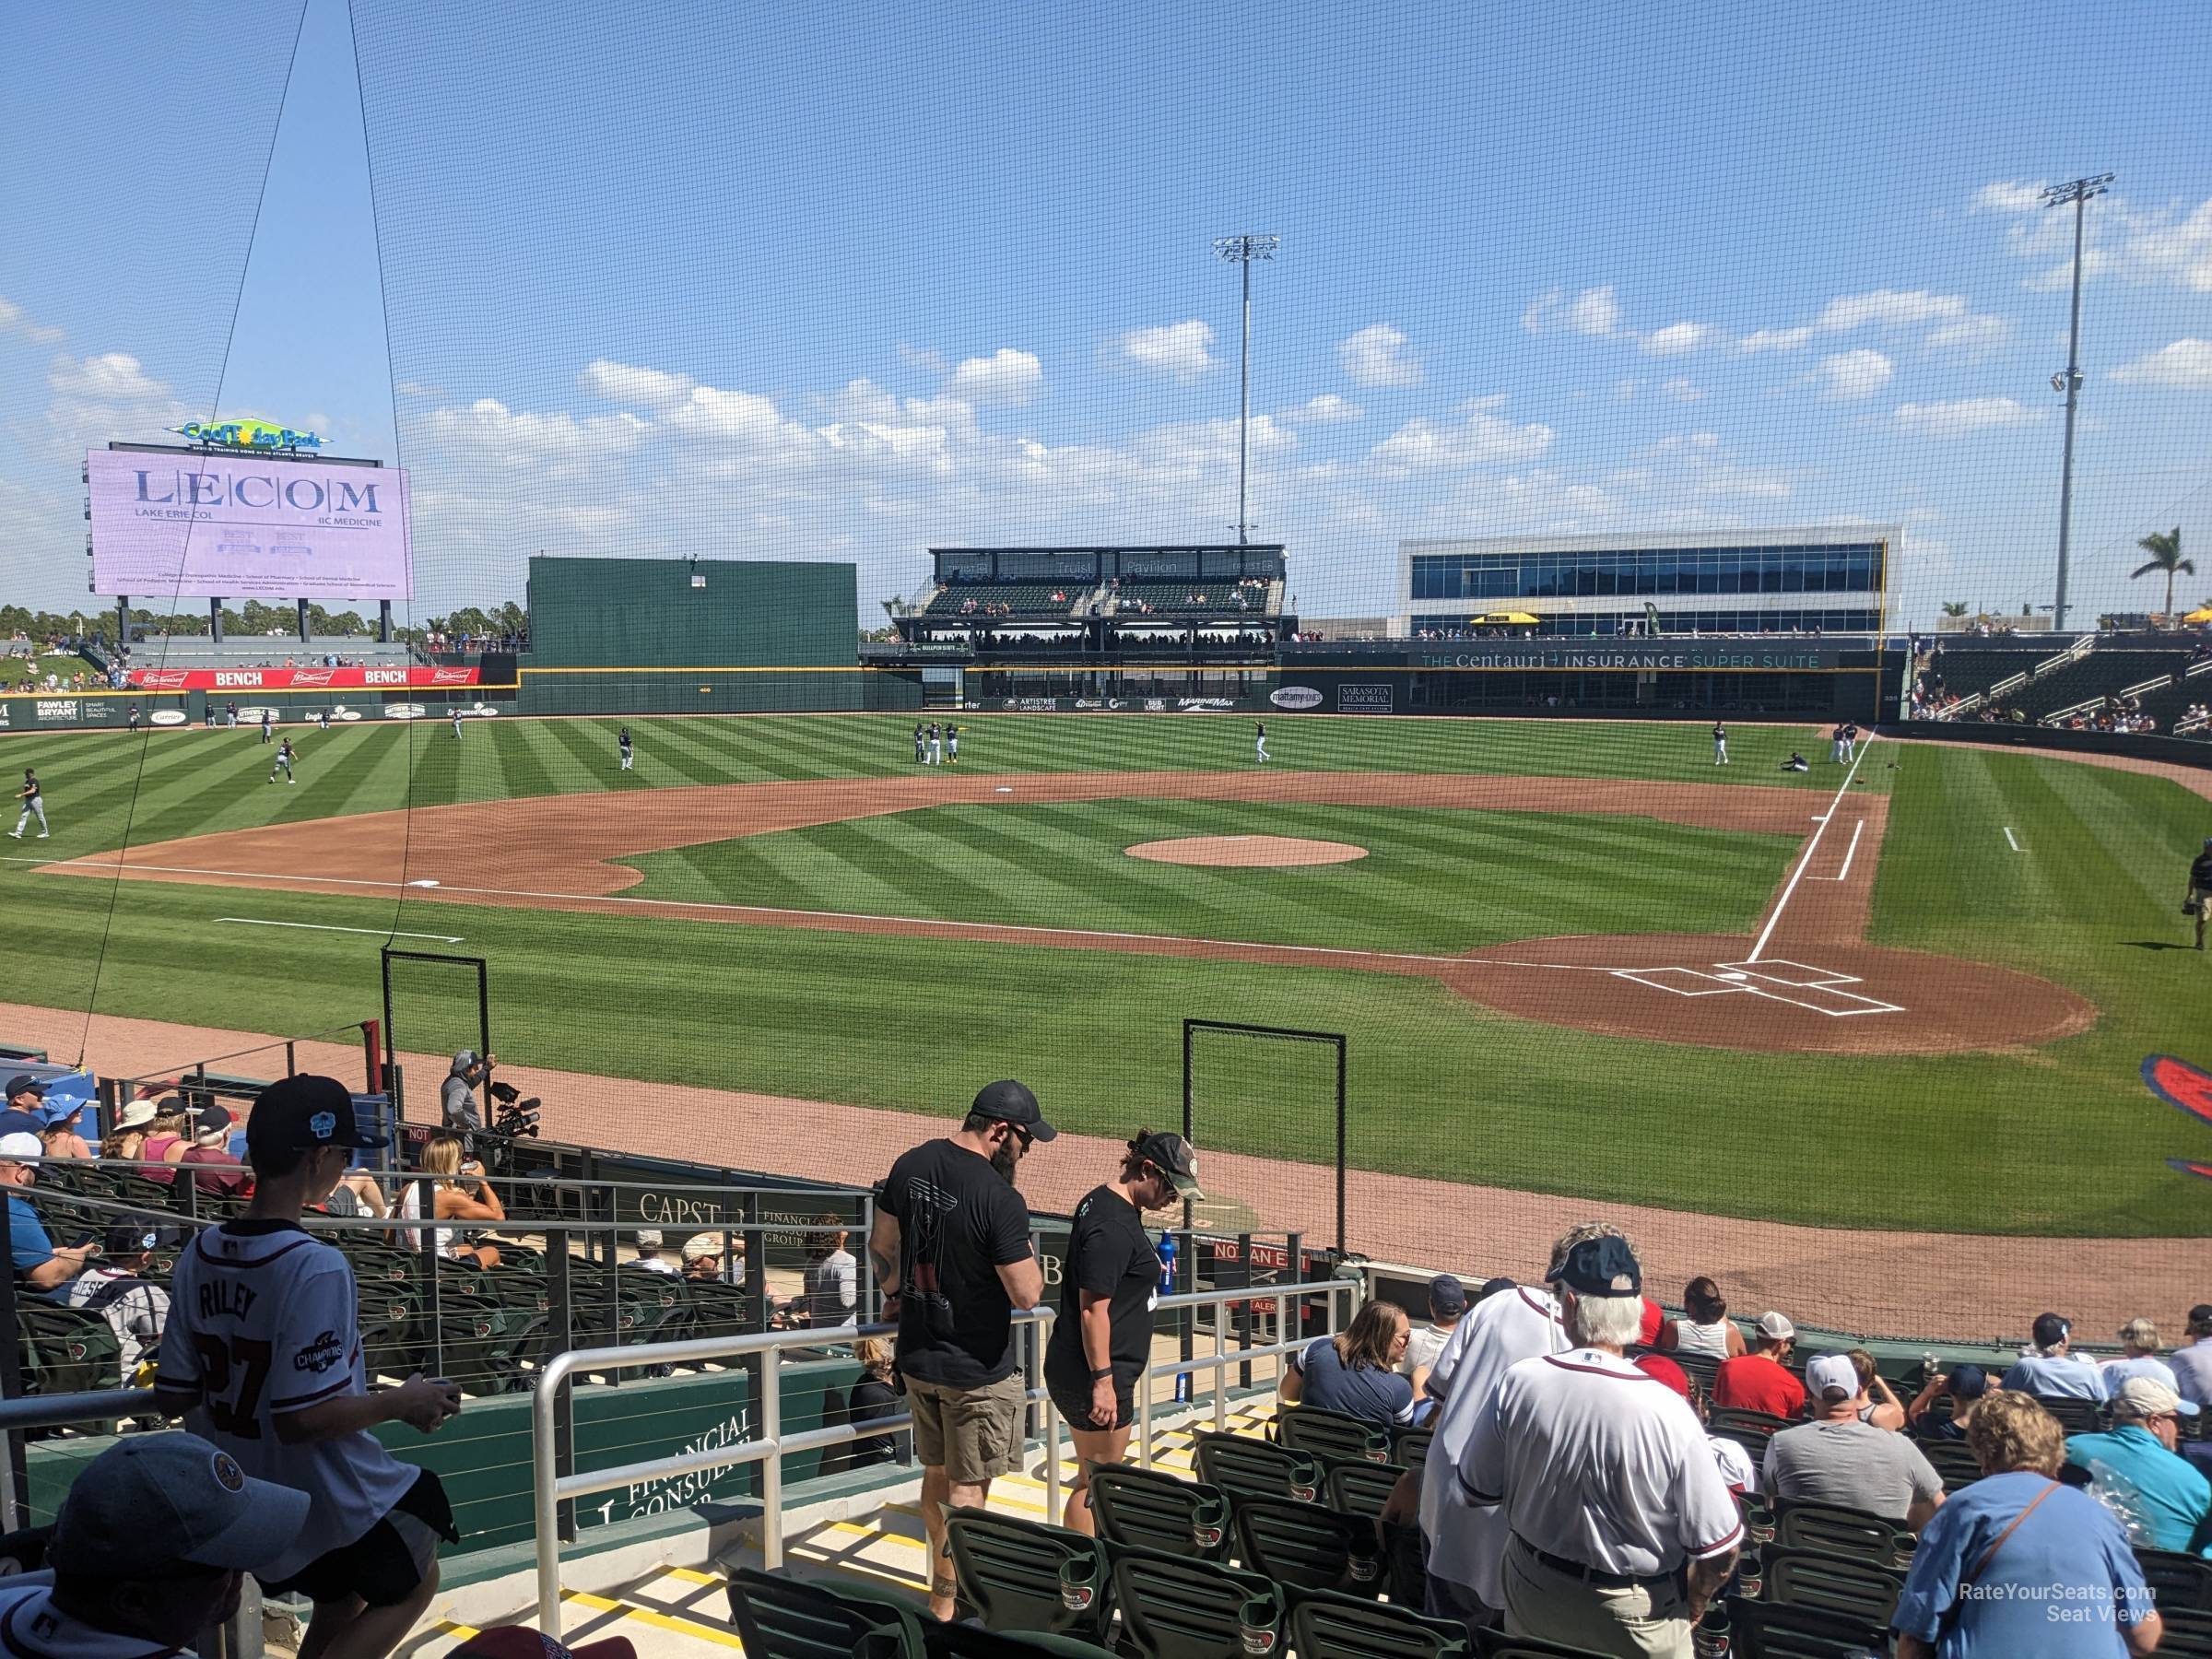 section 113, row 13 seat view  - cooltoday park